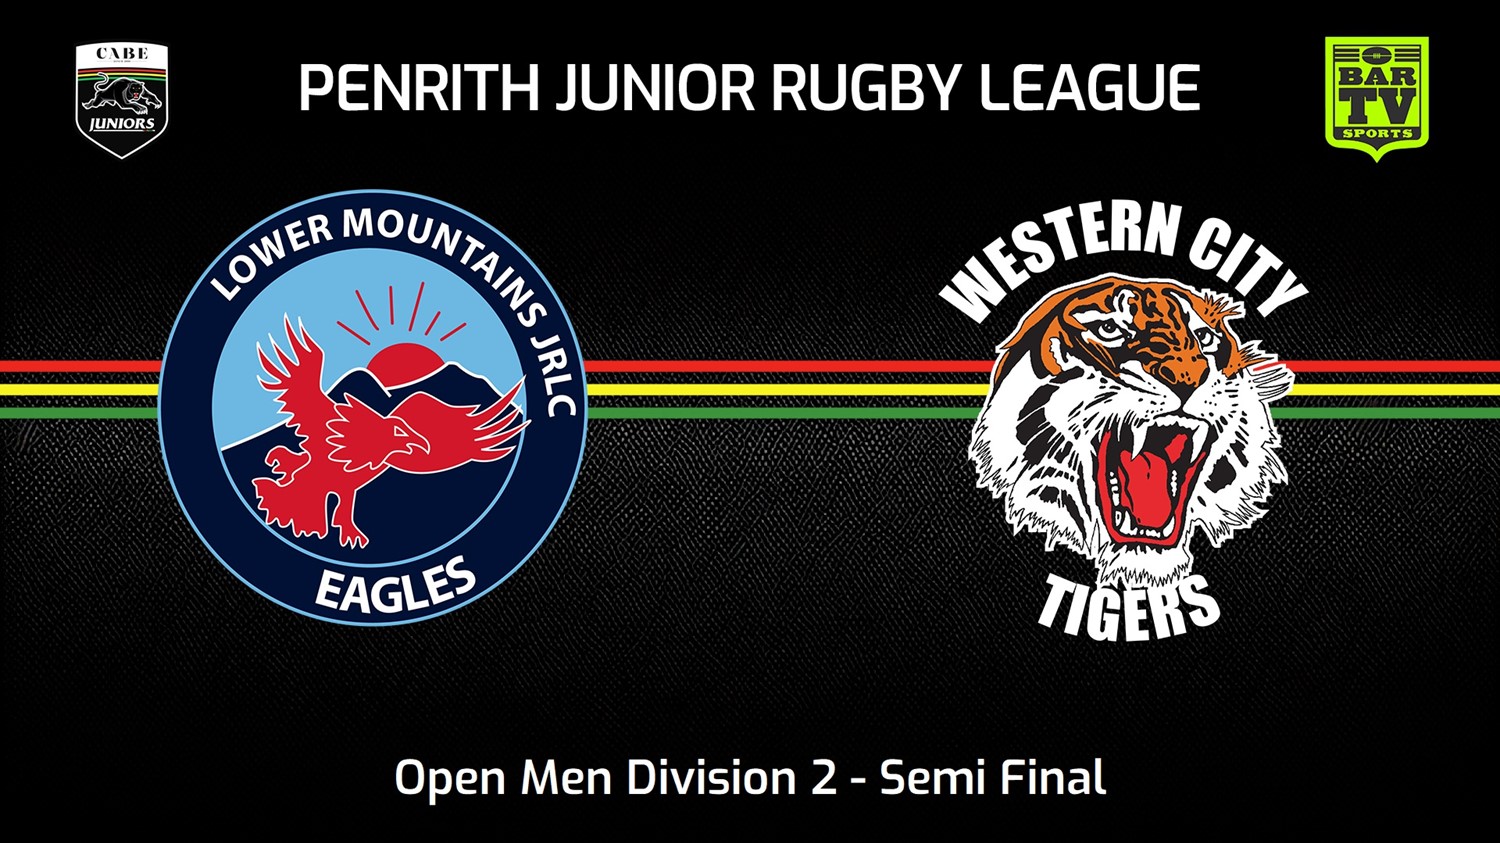 230806-Penrith & District Junior Rugby League Semi Final - Open Men Division 2 - Lower Mountains v Western City Tigers Slate Image